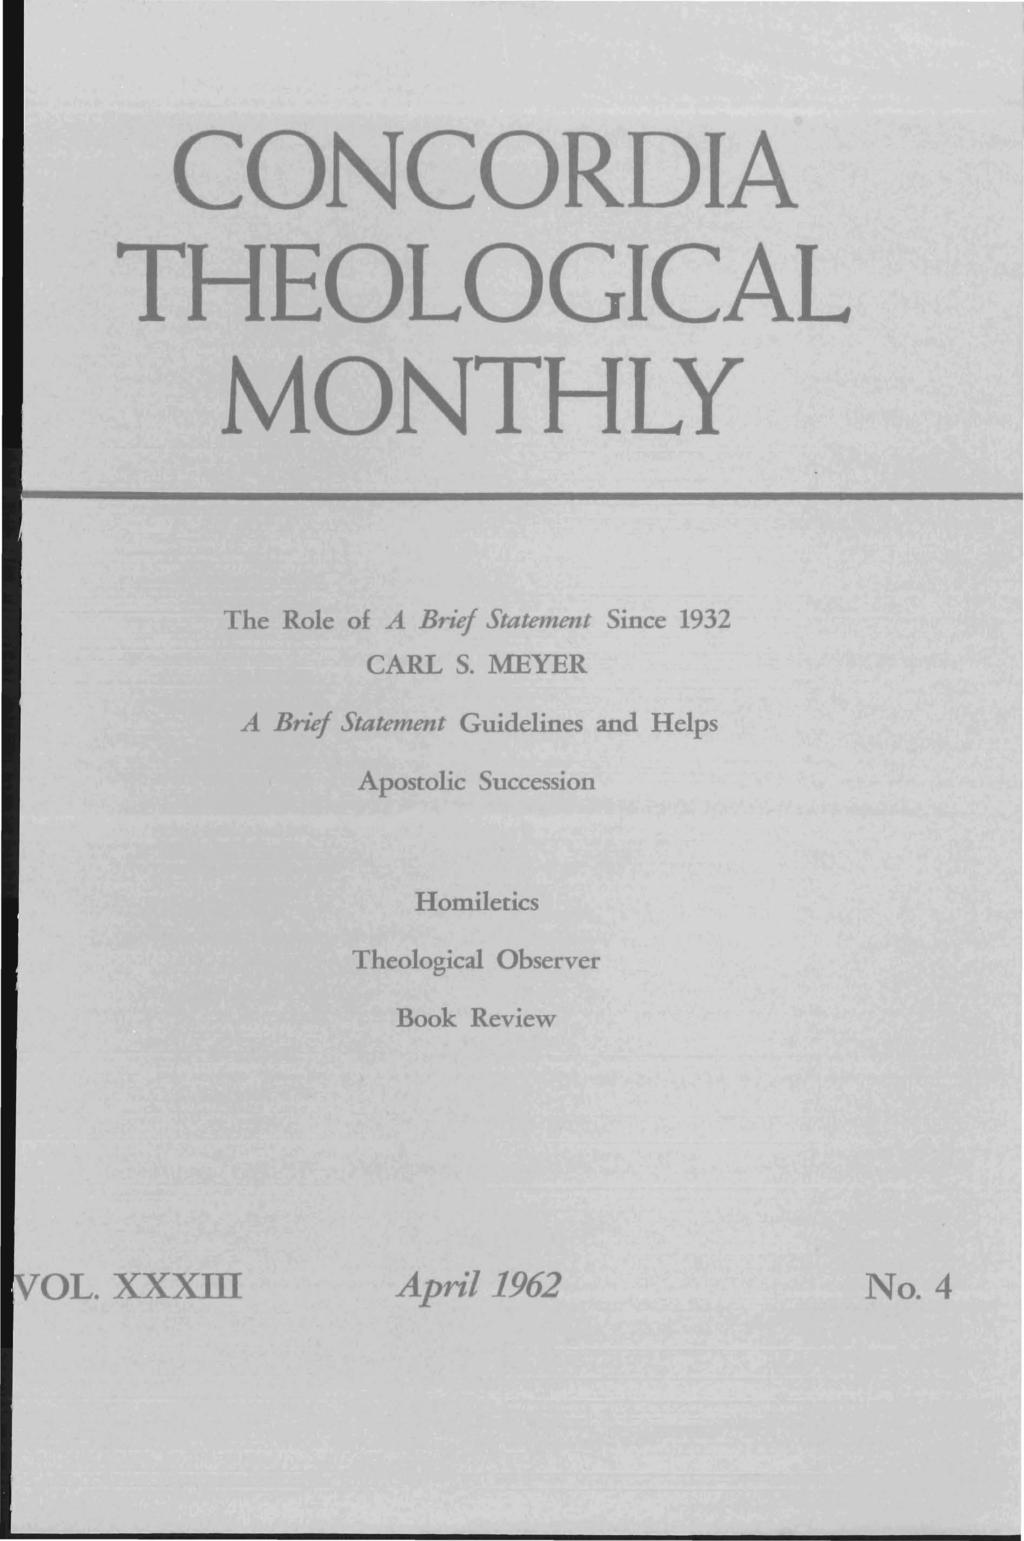 CONCORDIA THEOLOGICAL MONTHLY The Role of A Brief Statement Since 1932 CARL S.